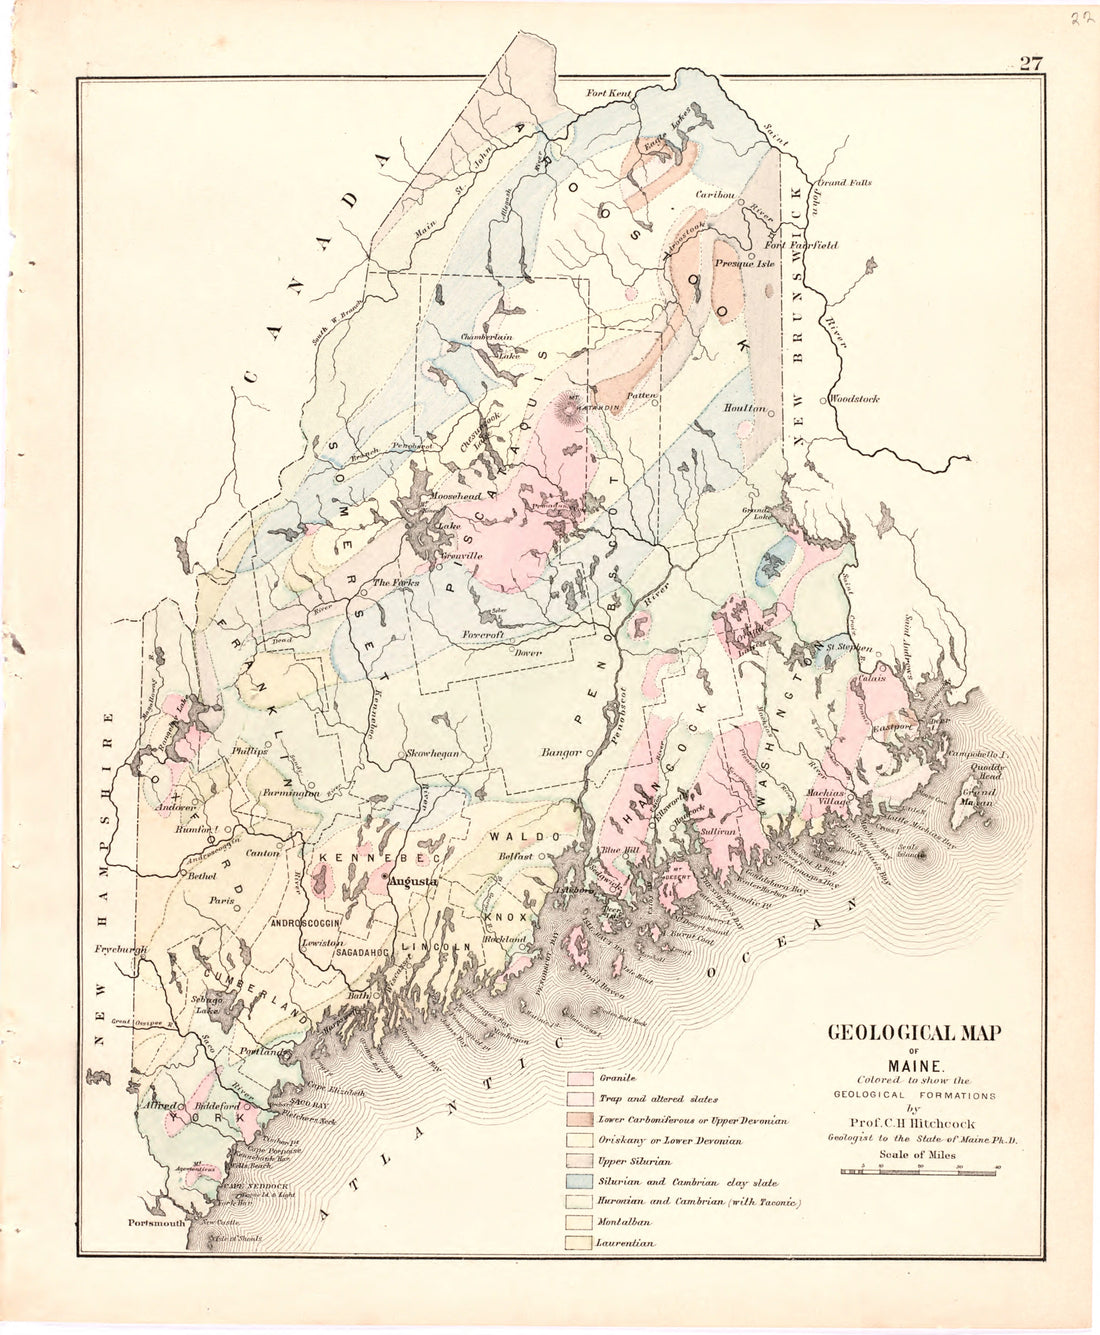 This hand drawn illustration (map) of Geological Map of Maine from Colby&